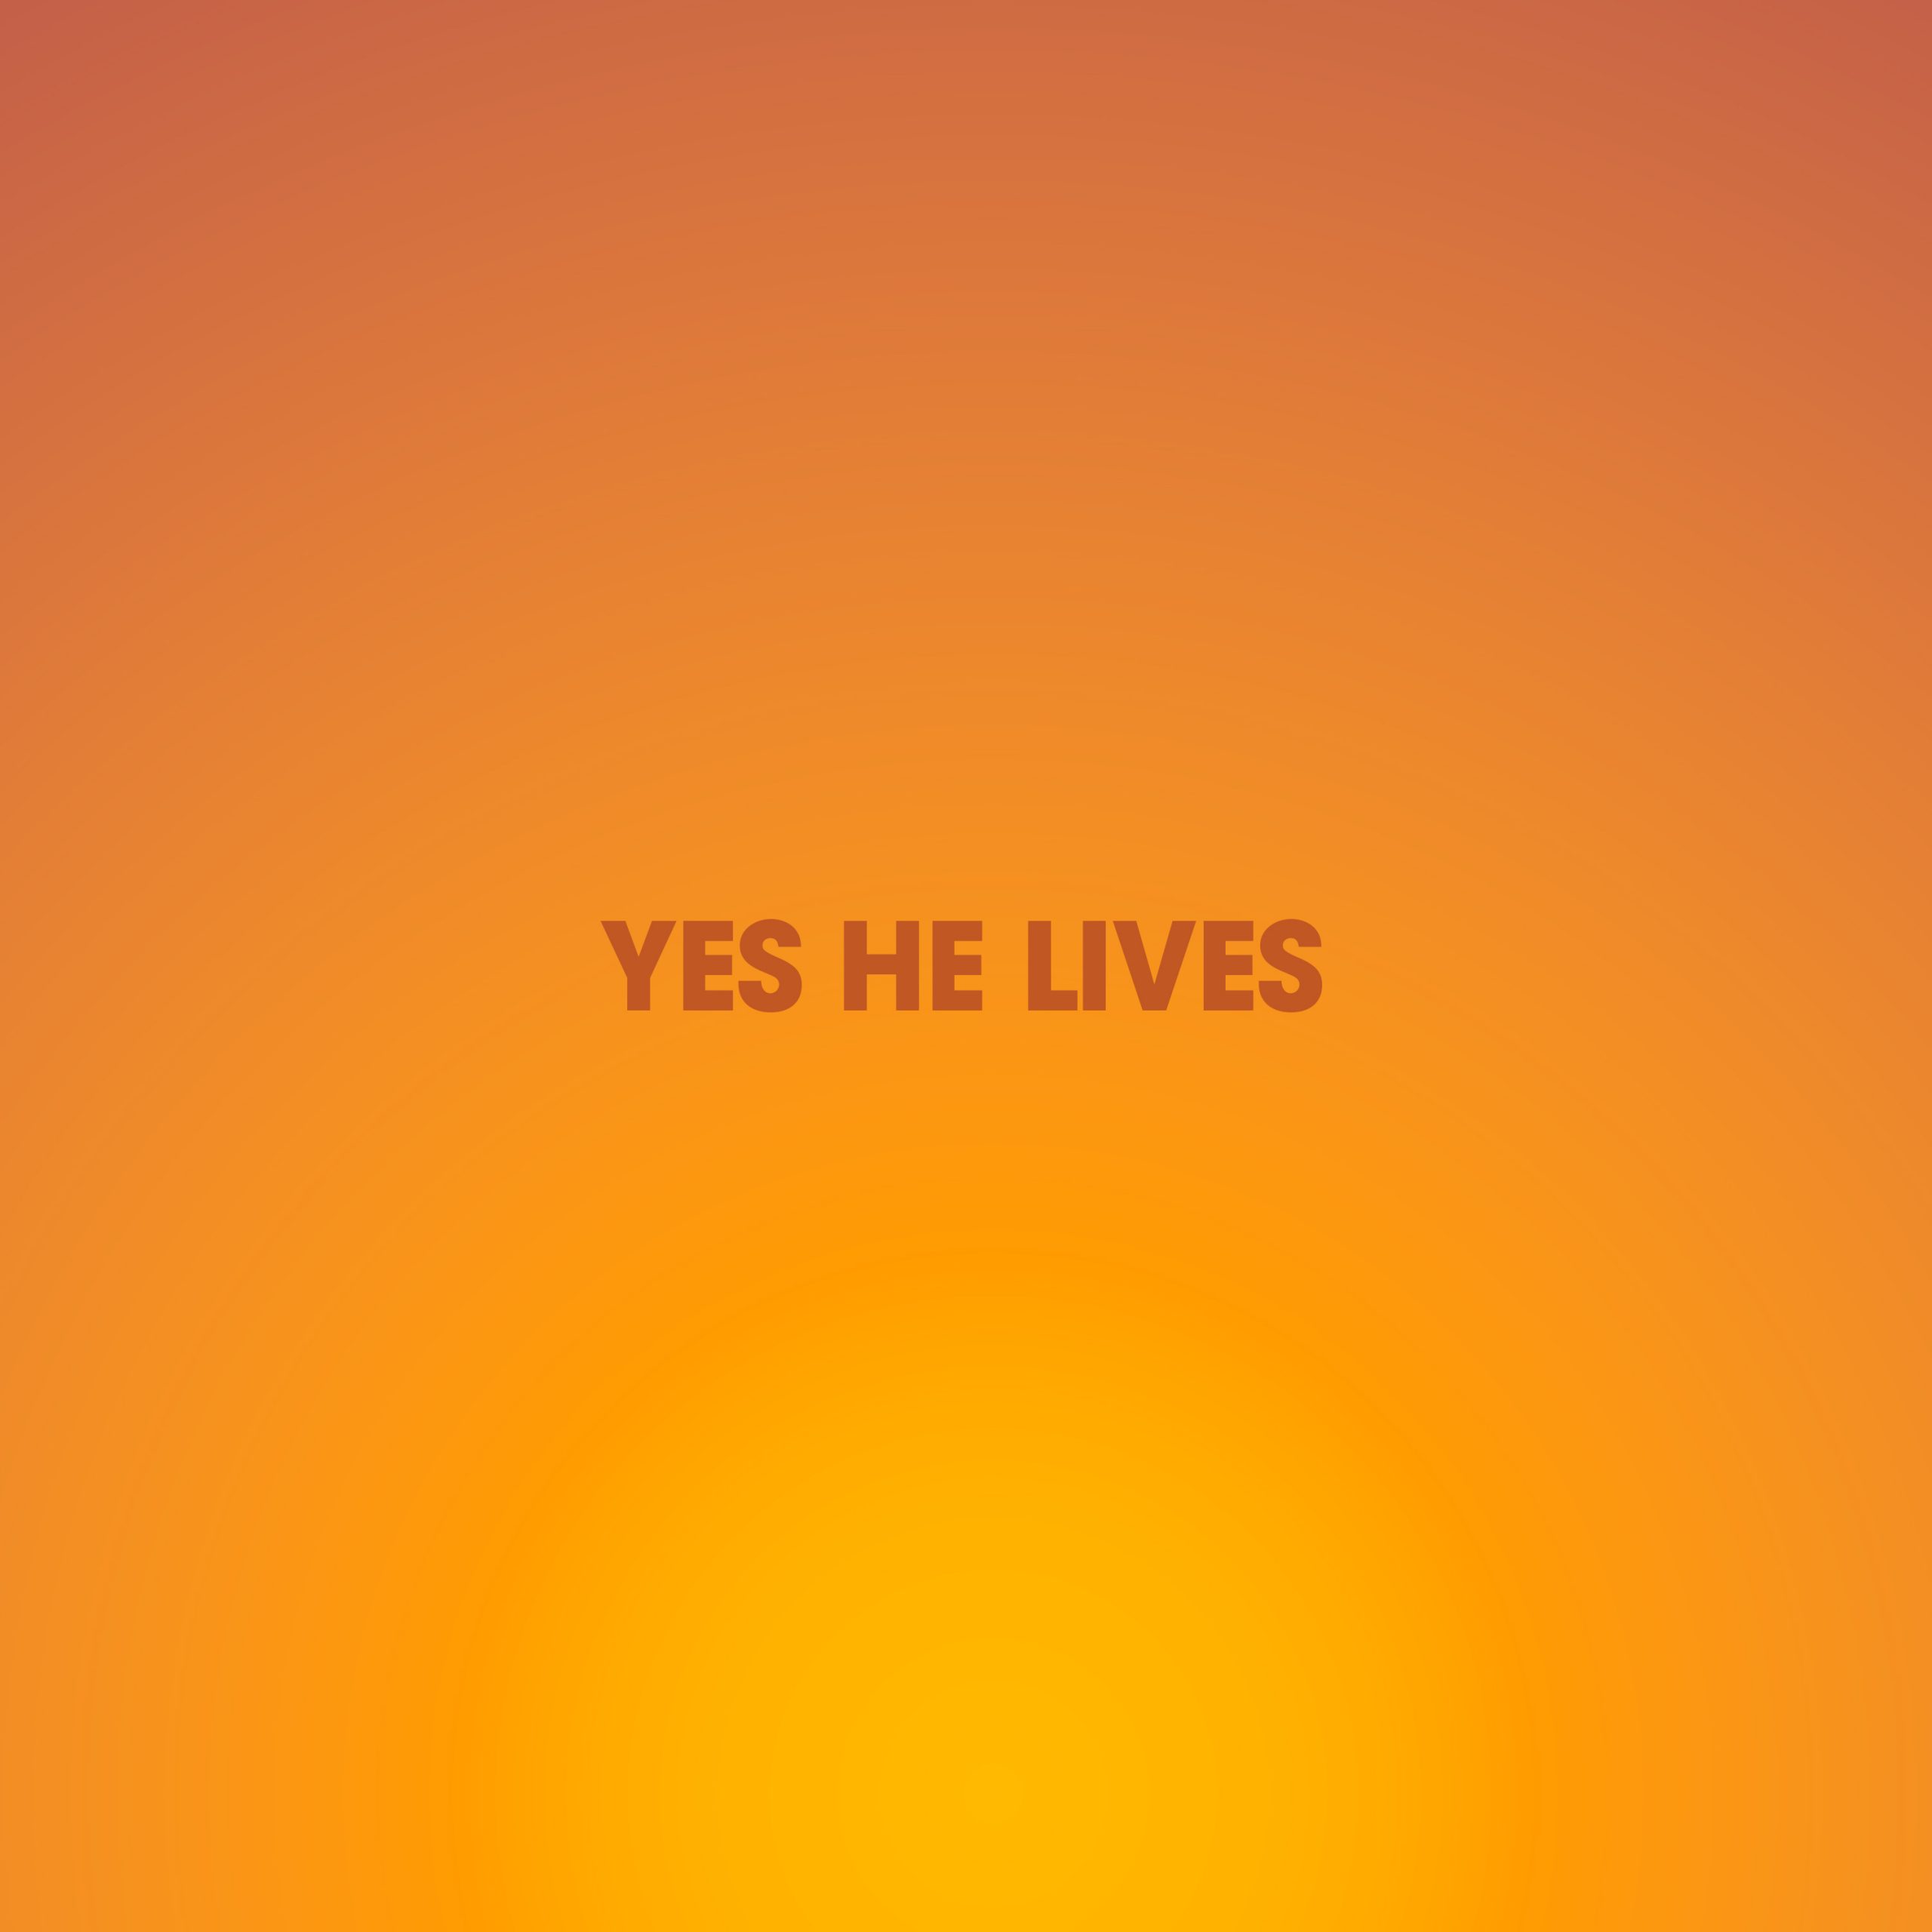 Yes He Lives